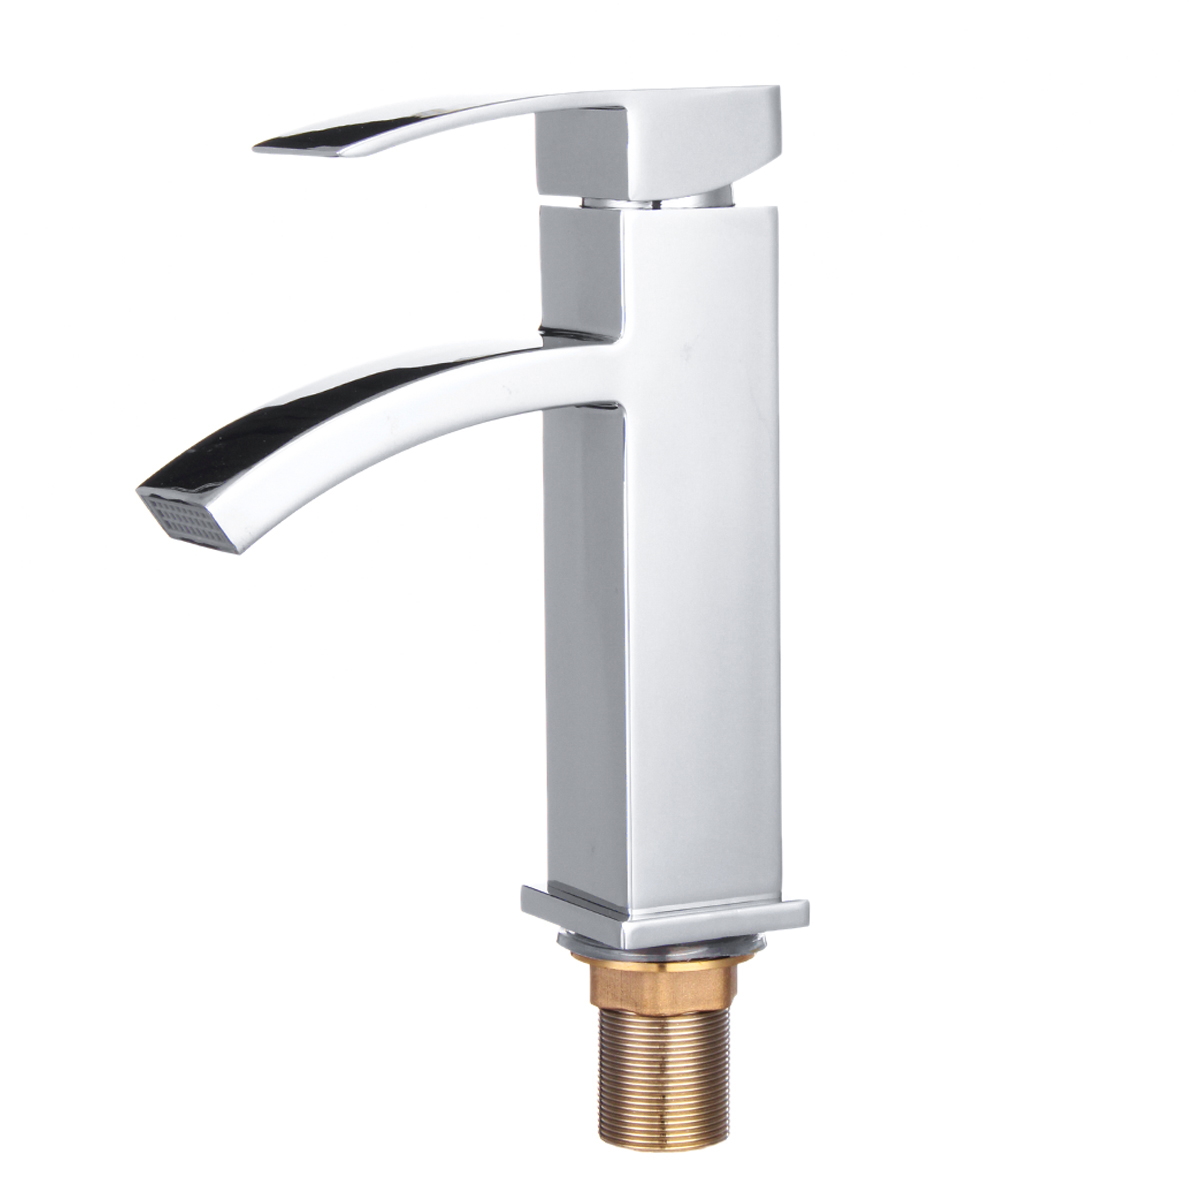 Yadianna Basin Taps Square Cloakroom Bathroom Sink Taps Mixers Chrome Brass with Vertical Washbasin Double-Type Hot and Cold Under Counter Basin-A 